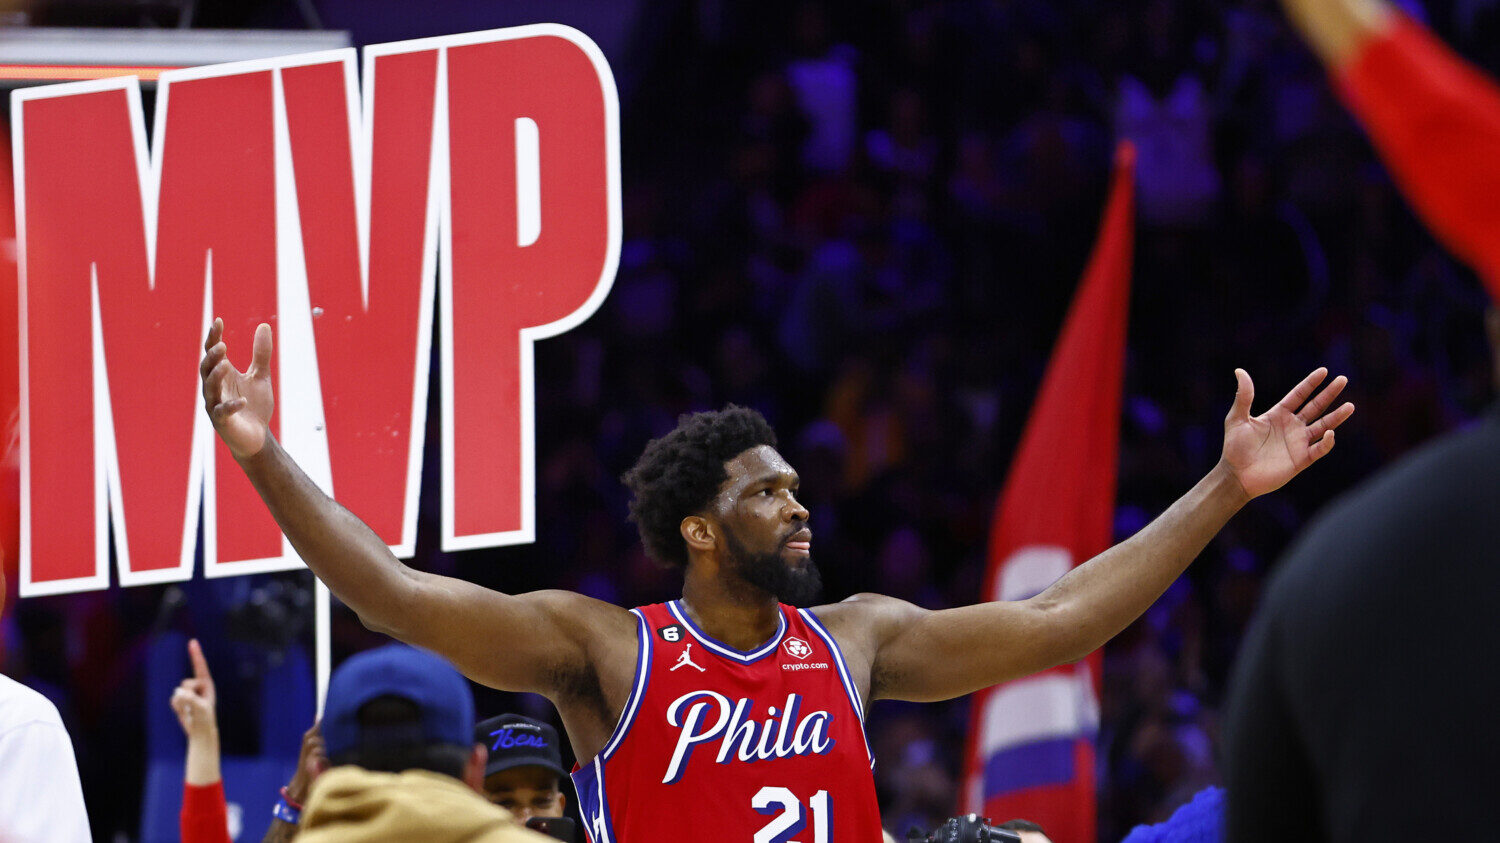 Rumors: Is Joel Embiid being given the MVP award tonight?